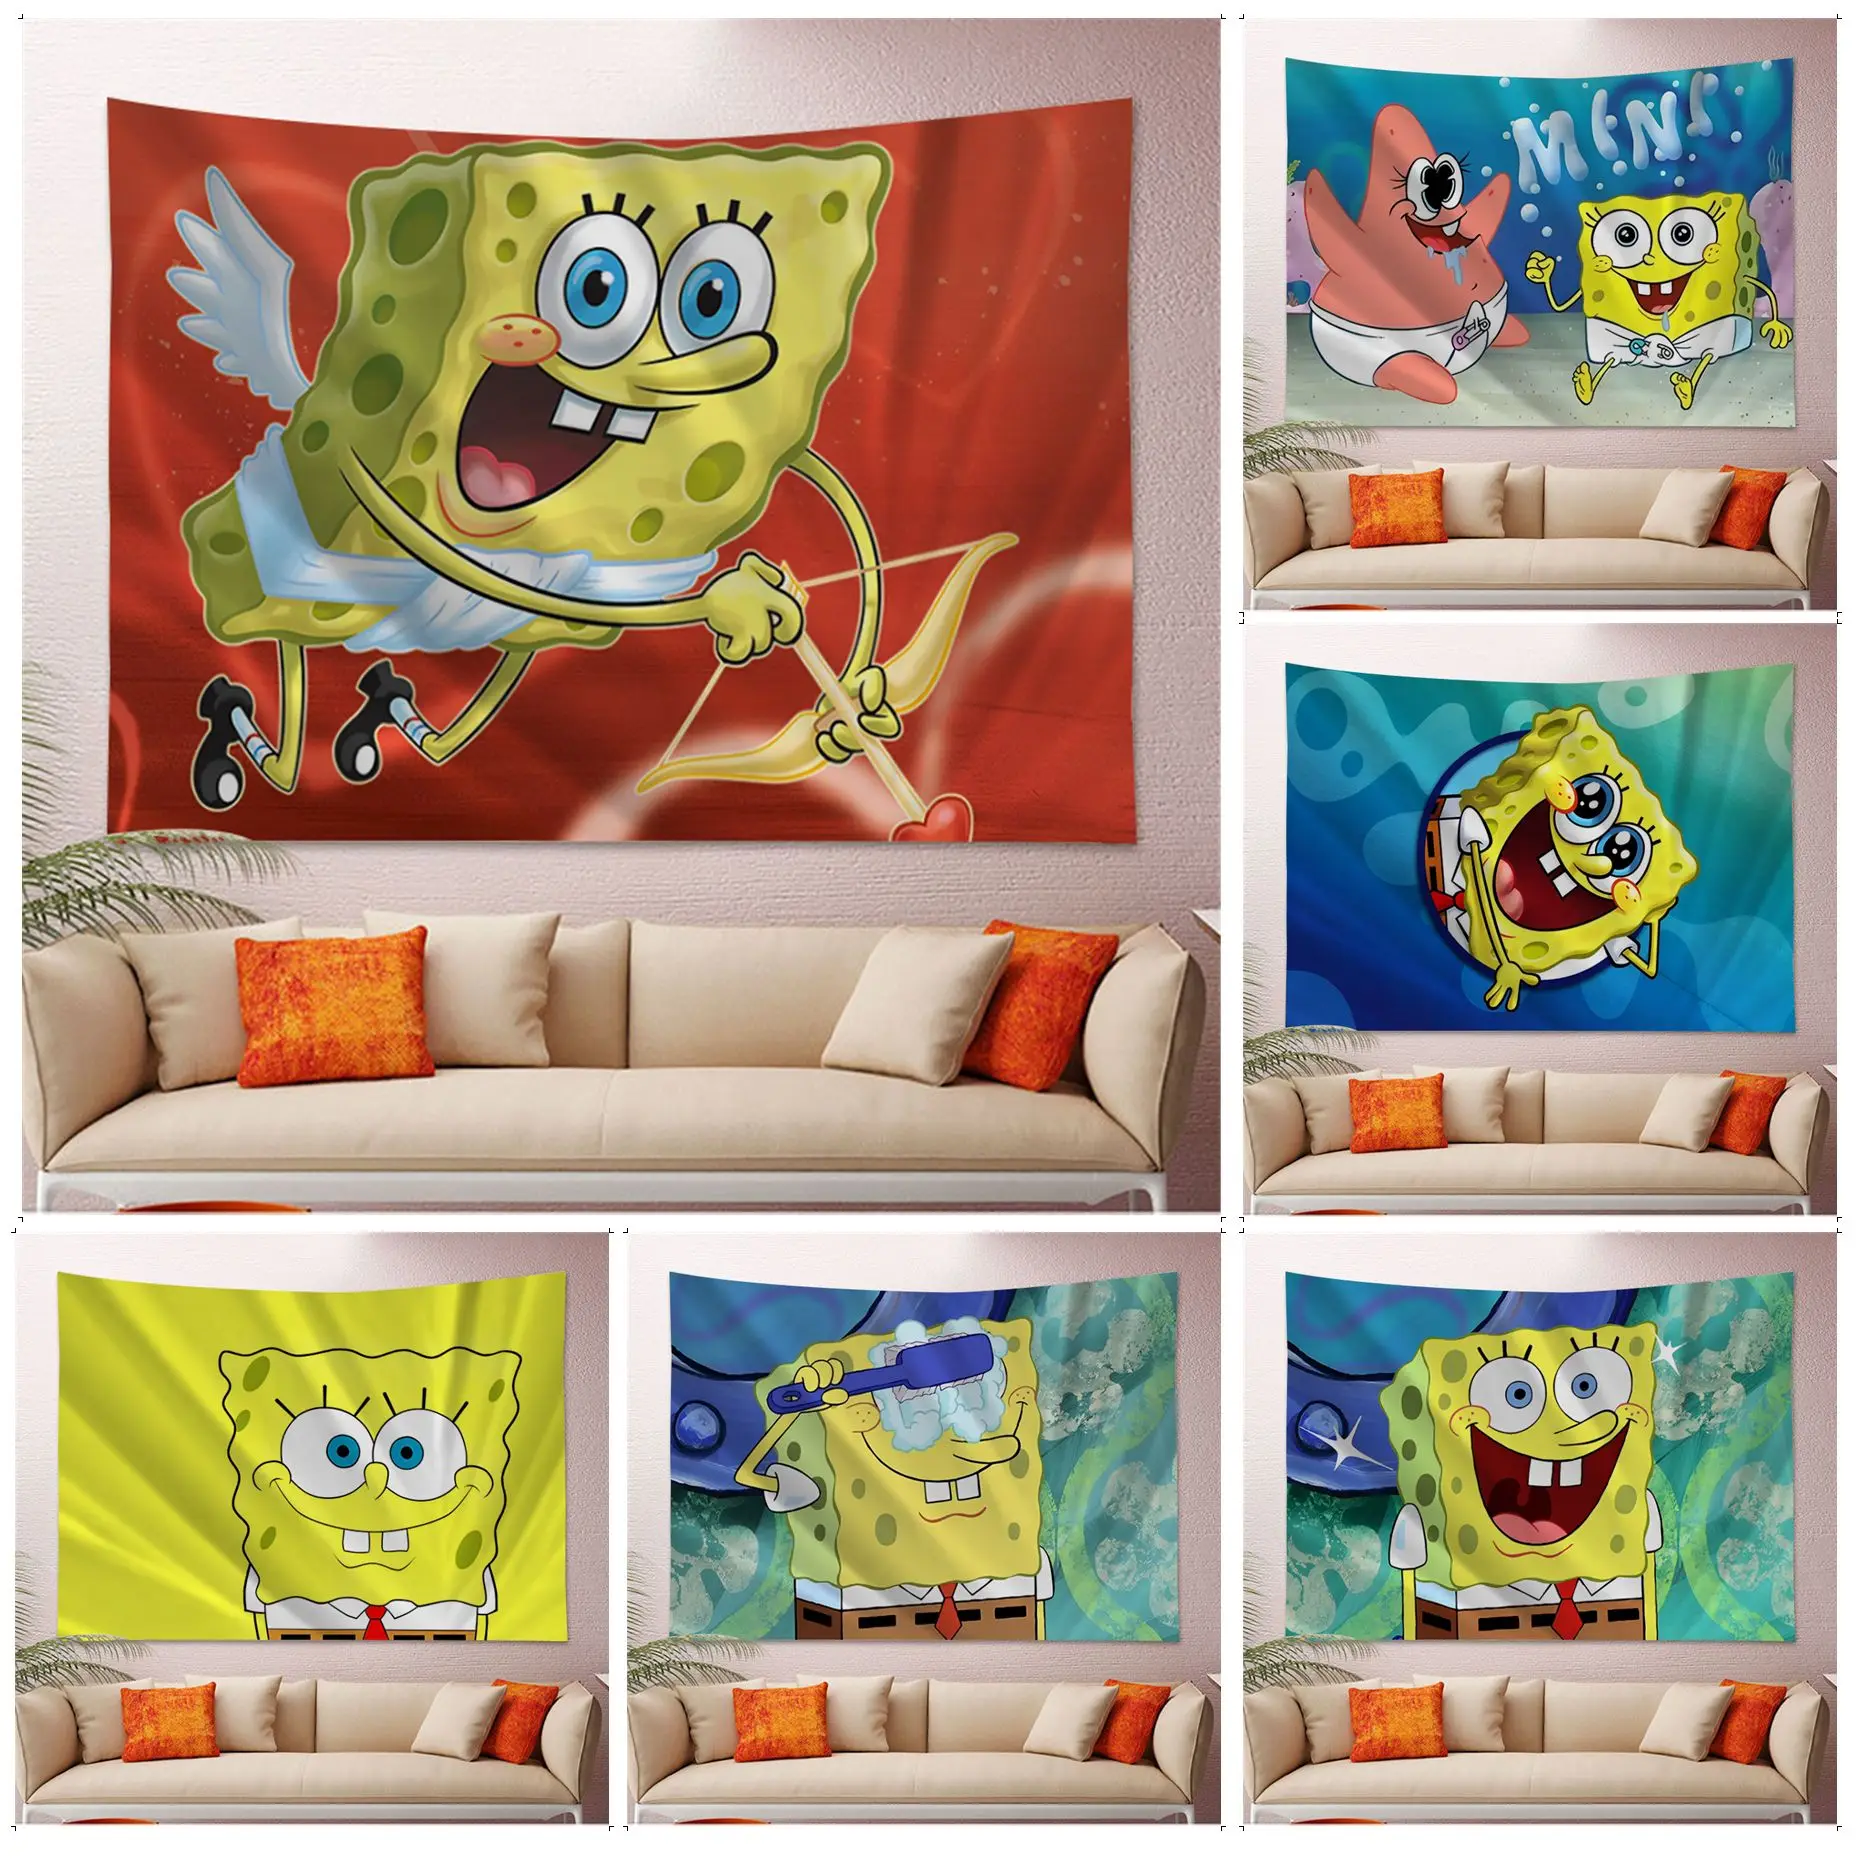 

S-SpongeBobs Printed Large Wall Tapestry Art Science Fiction Room Home Decor Japanese Tapestry